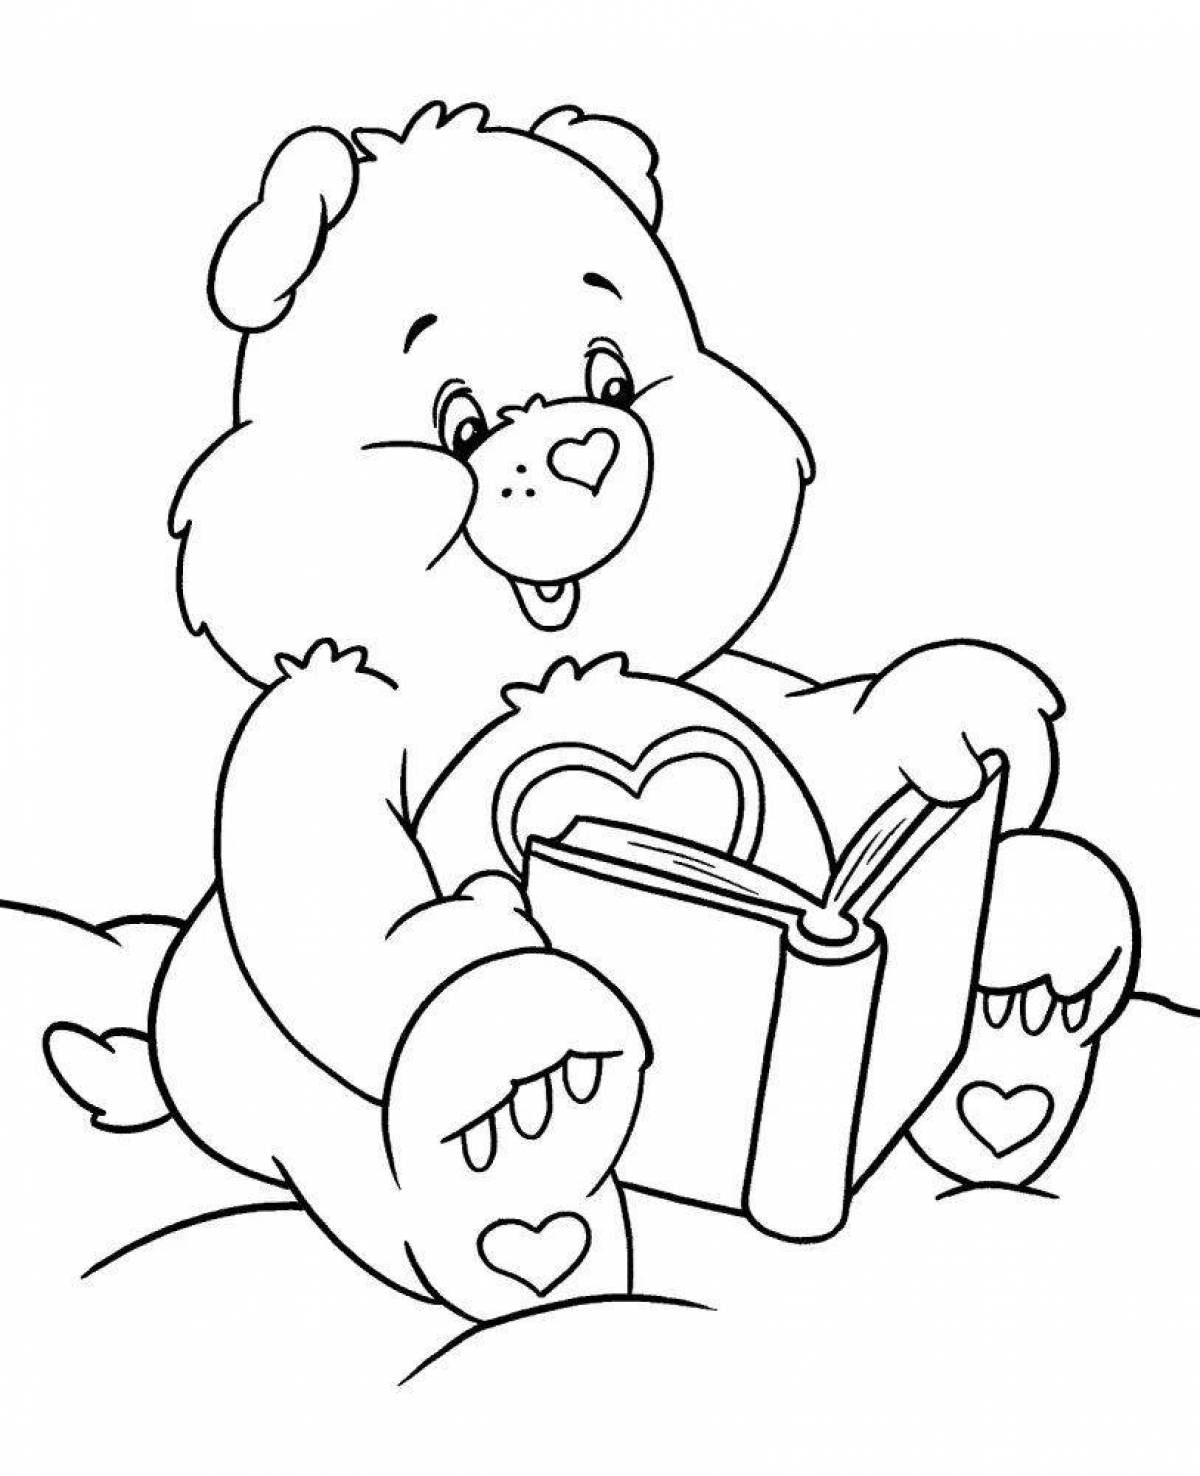 Busy coloring bear